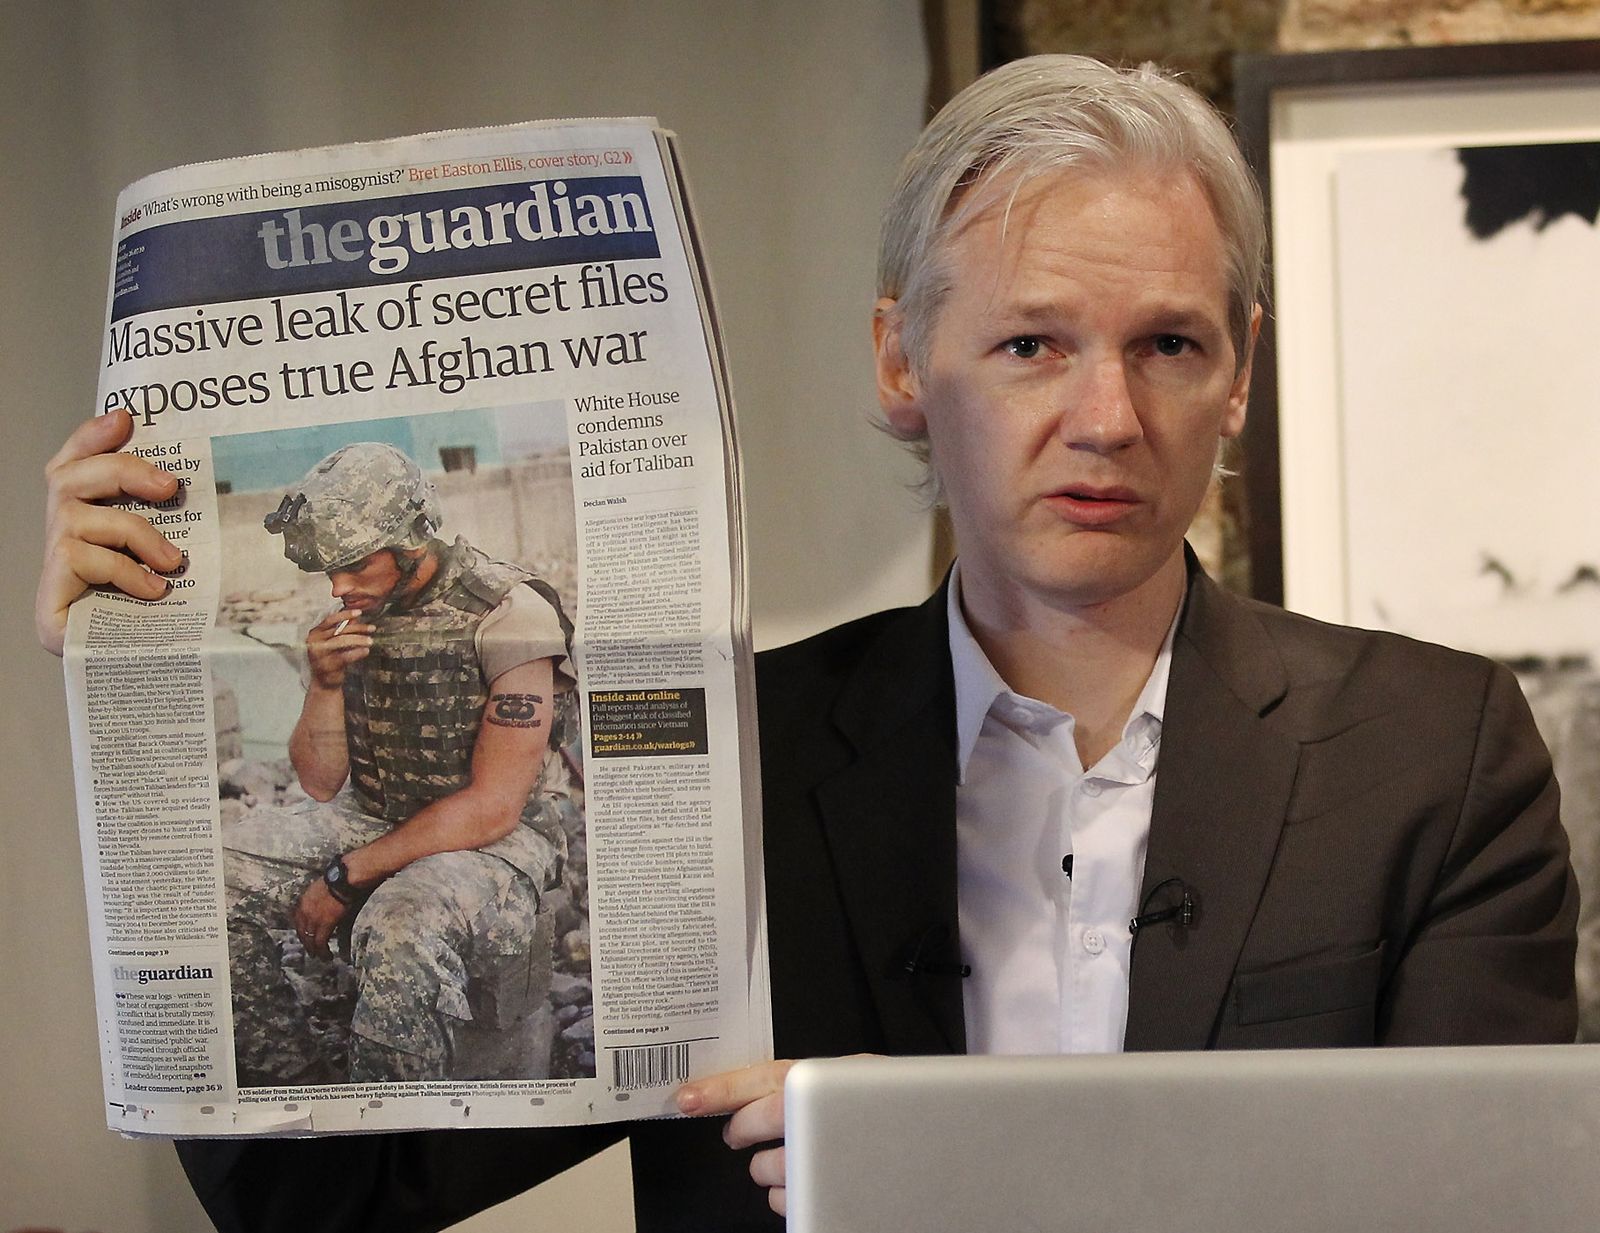 WikiLeaks | Founding, History, Chelsea Manning, & Controversies | Britannica